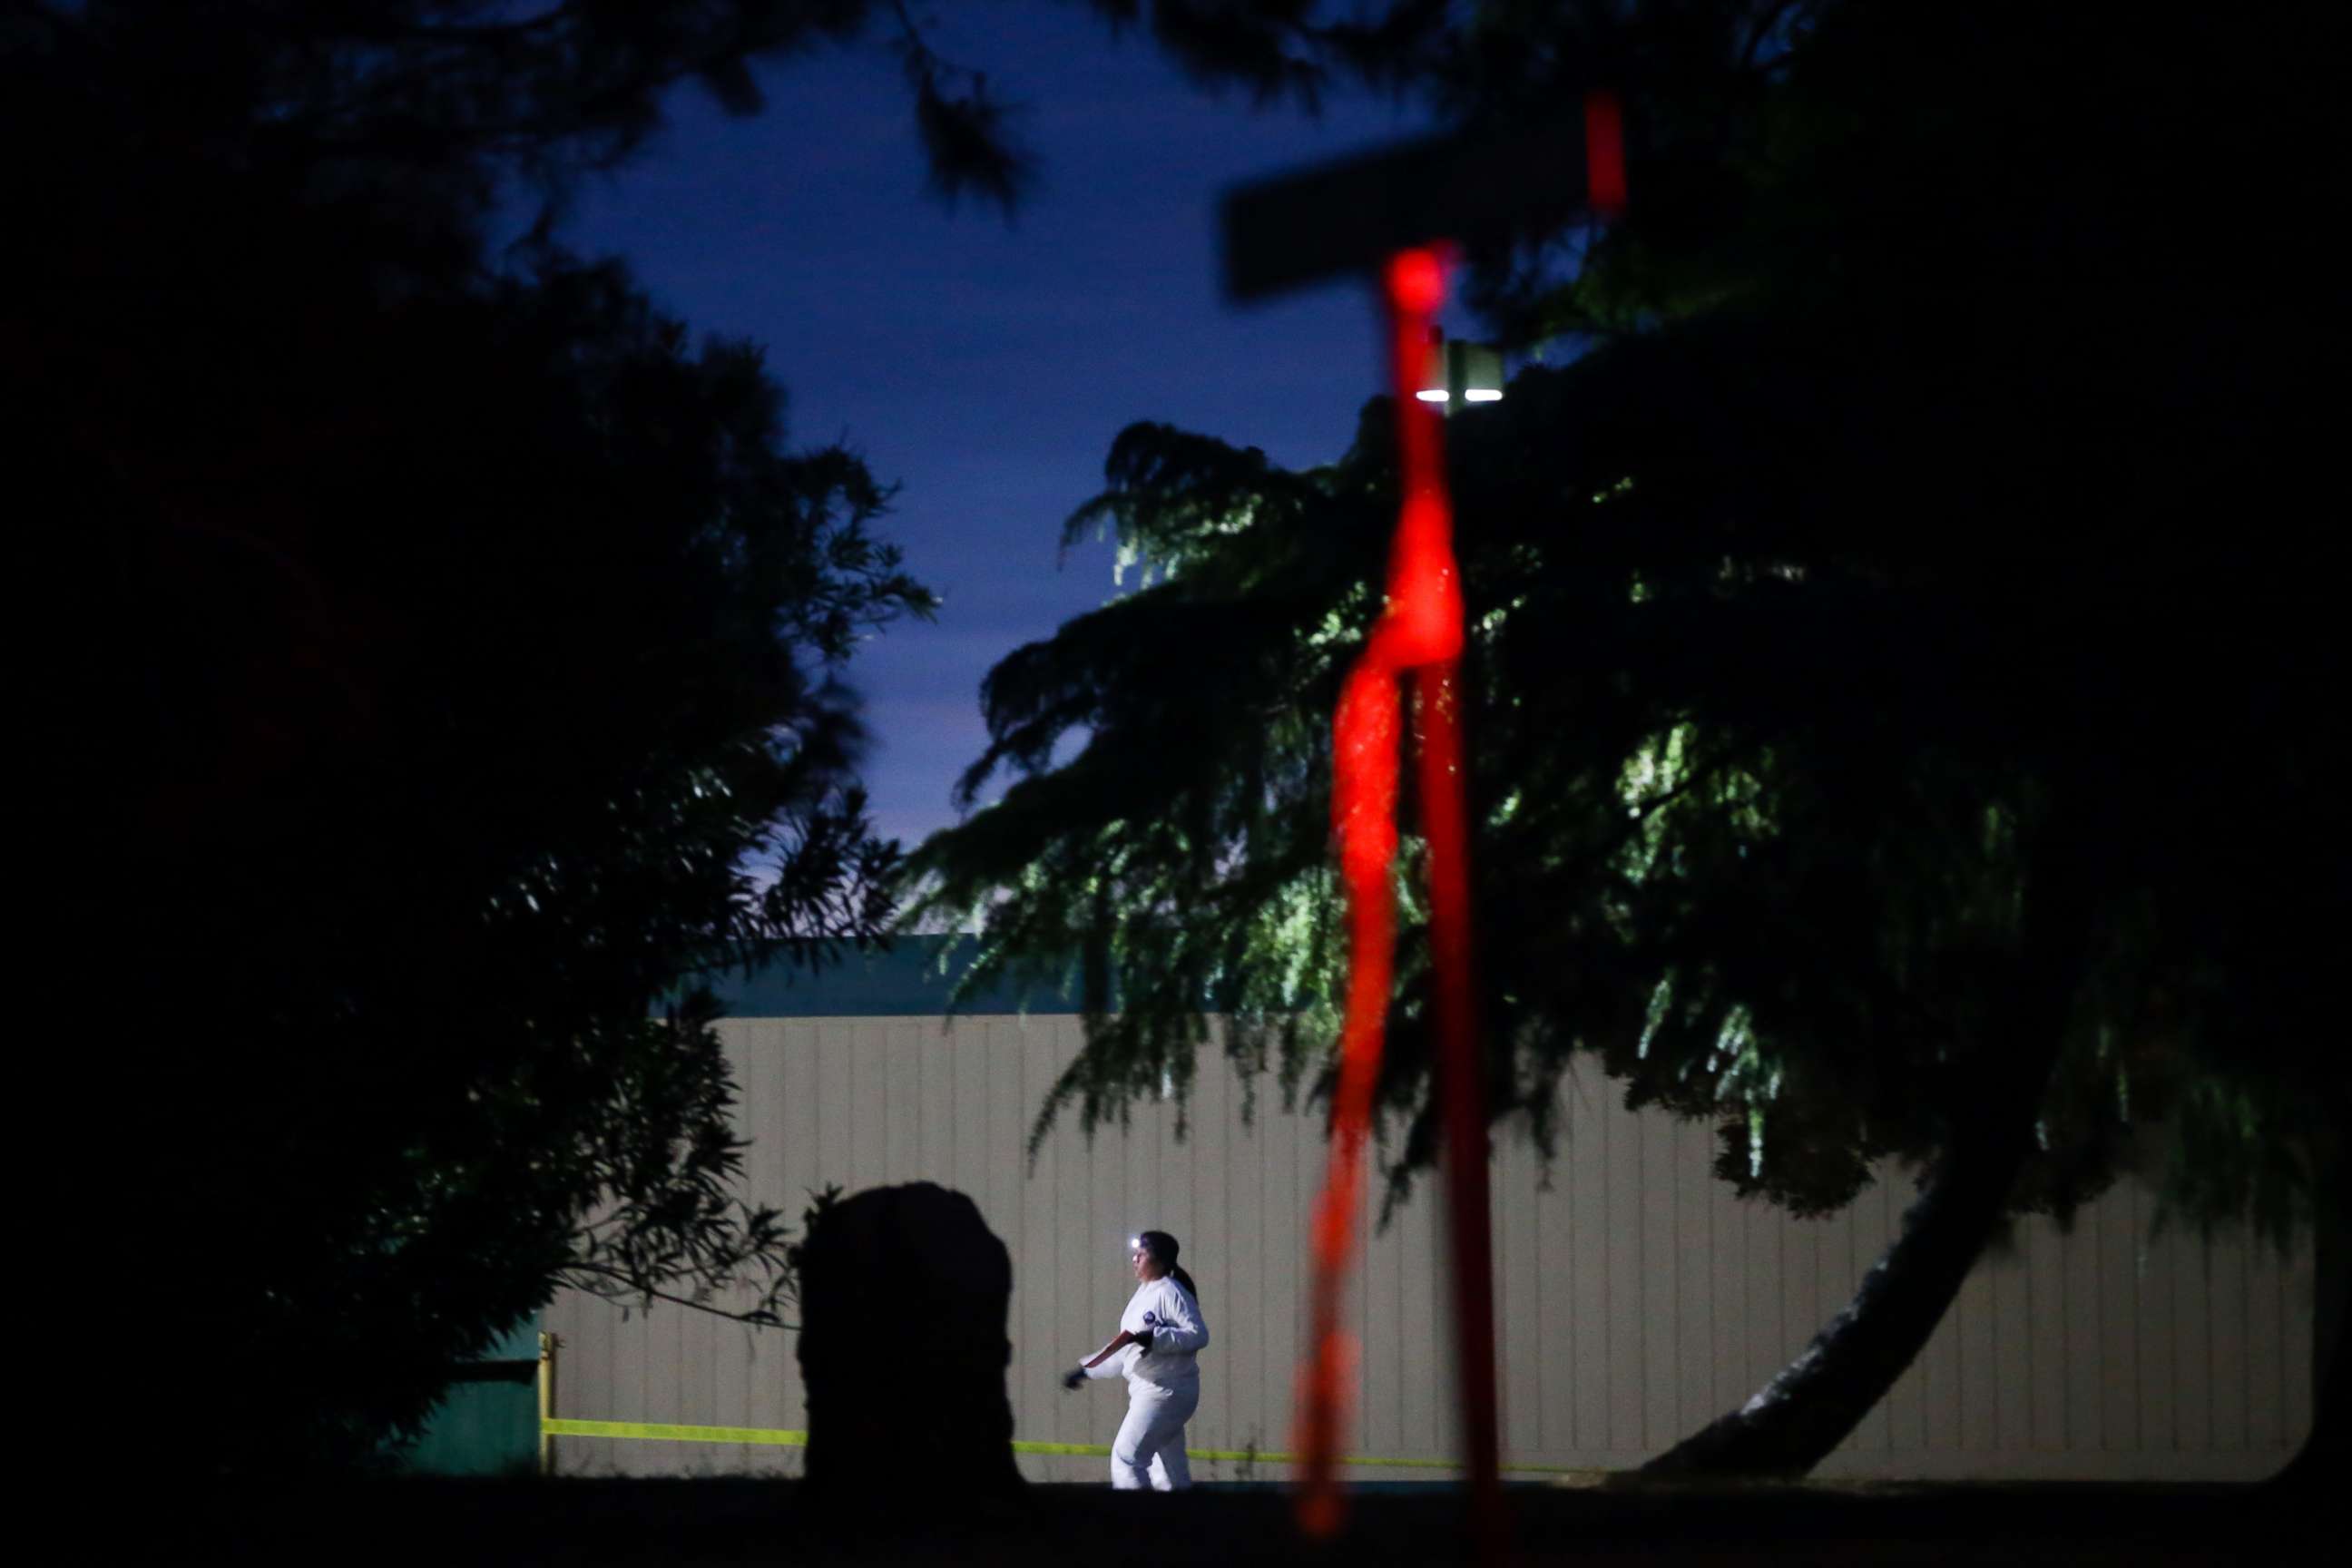 PHOTO: A woman wearing a white protective suit is seen on the Rancho Tehama Elementary school grounds after a shooting on Nov. 14, 2017, in Rancho Tehama, Calif.